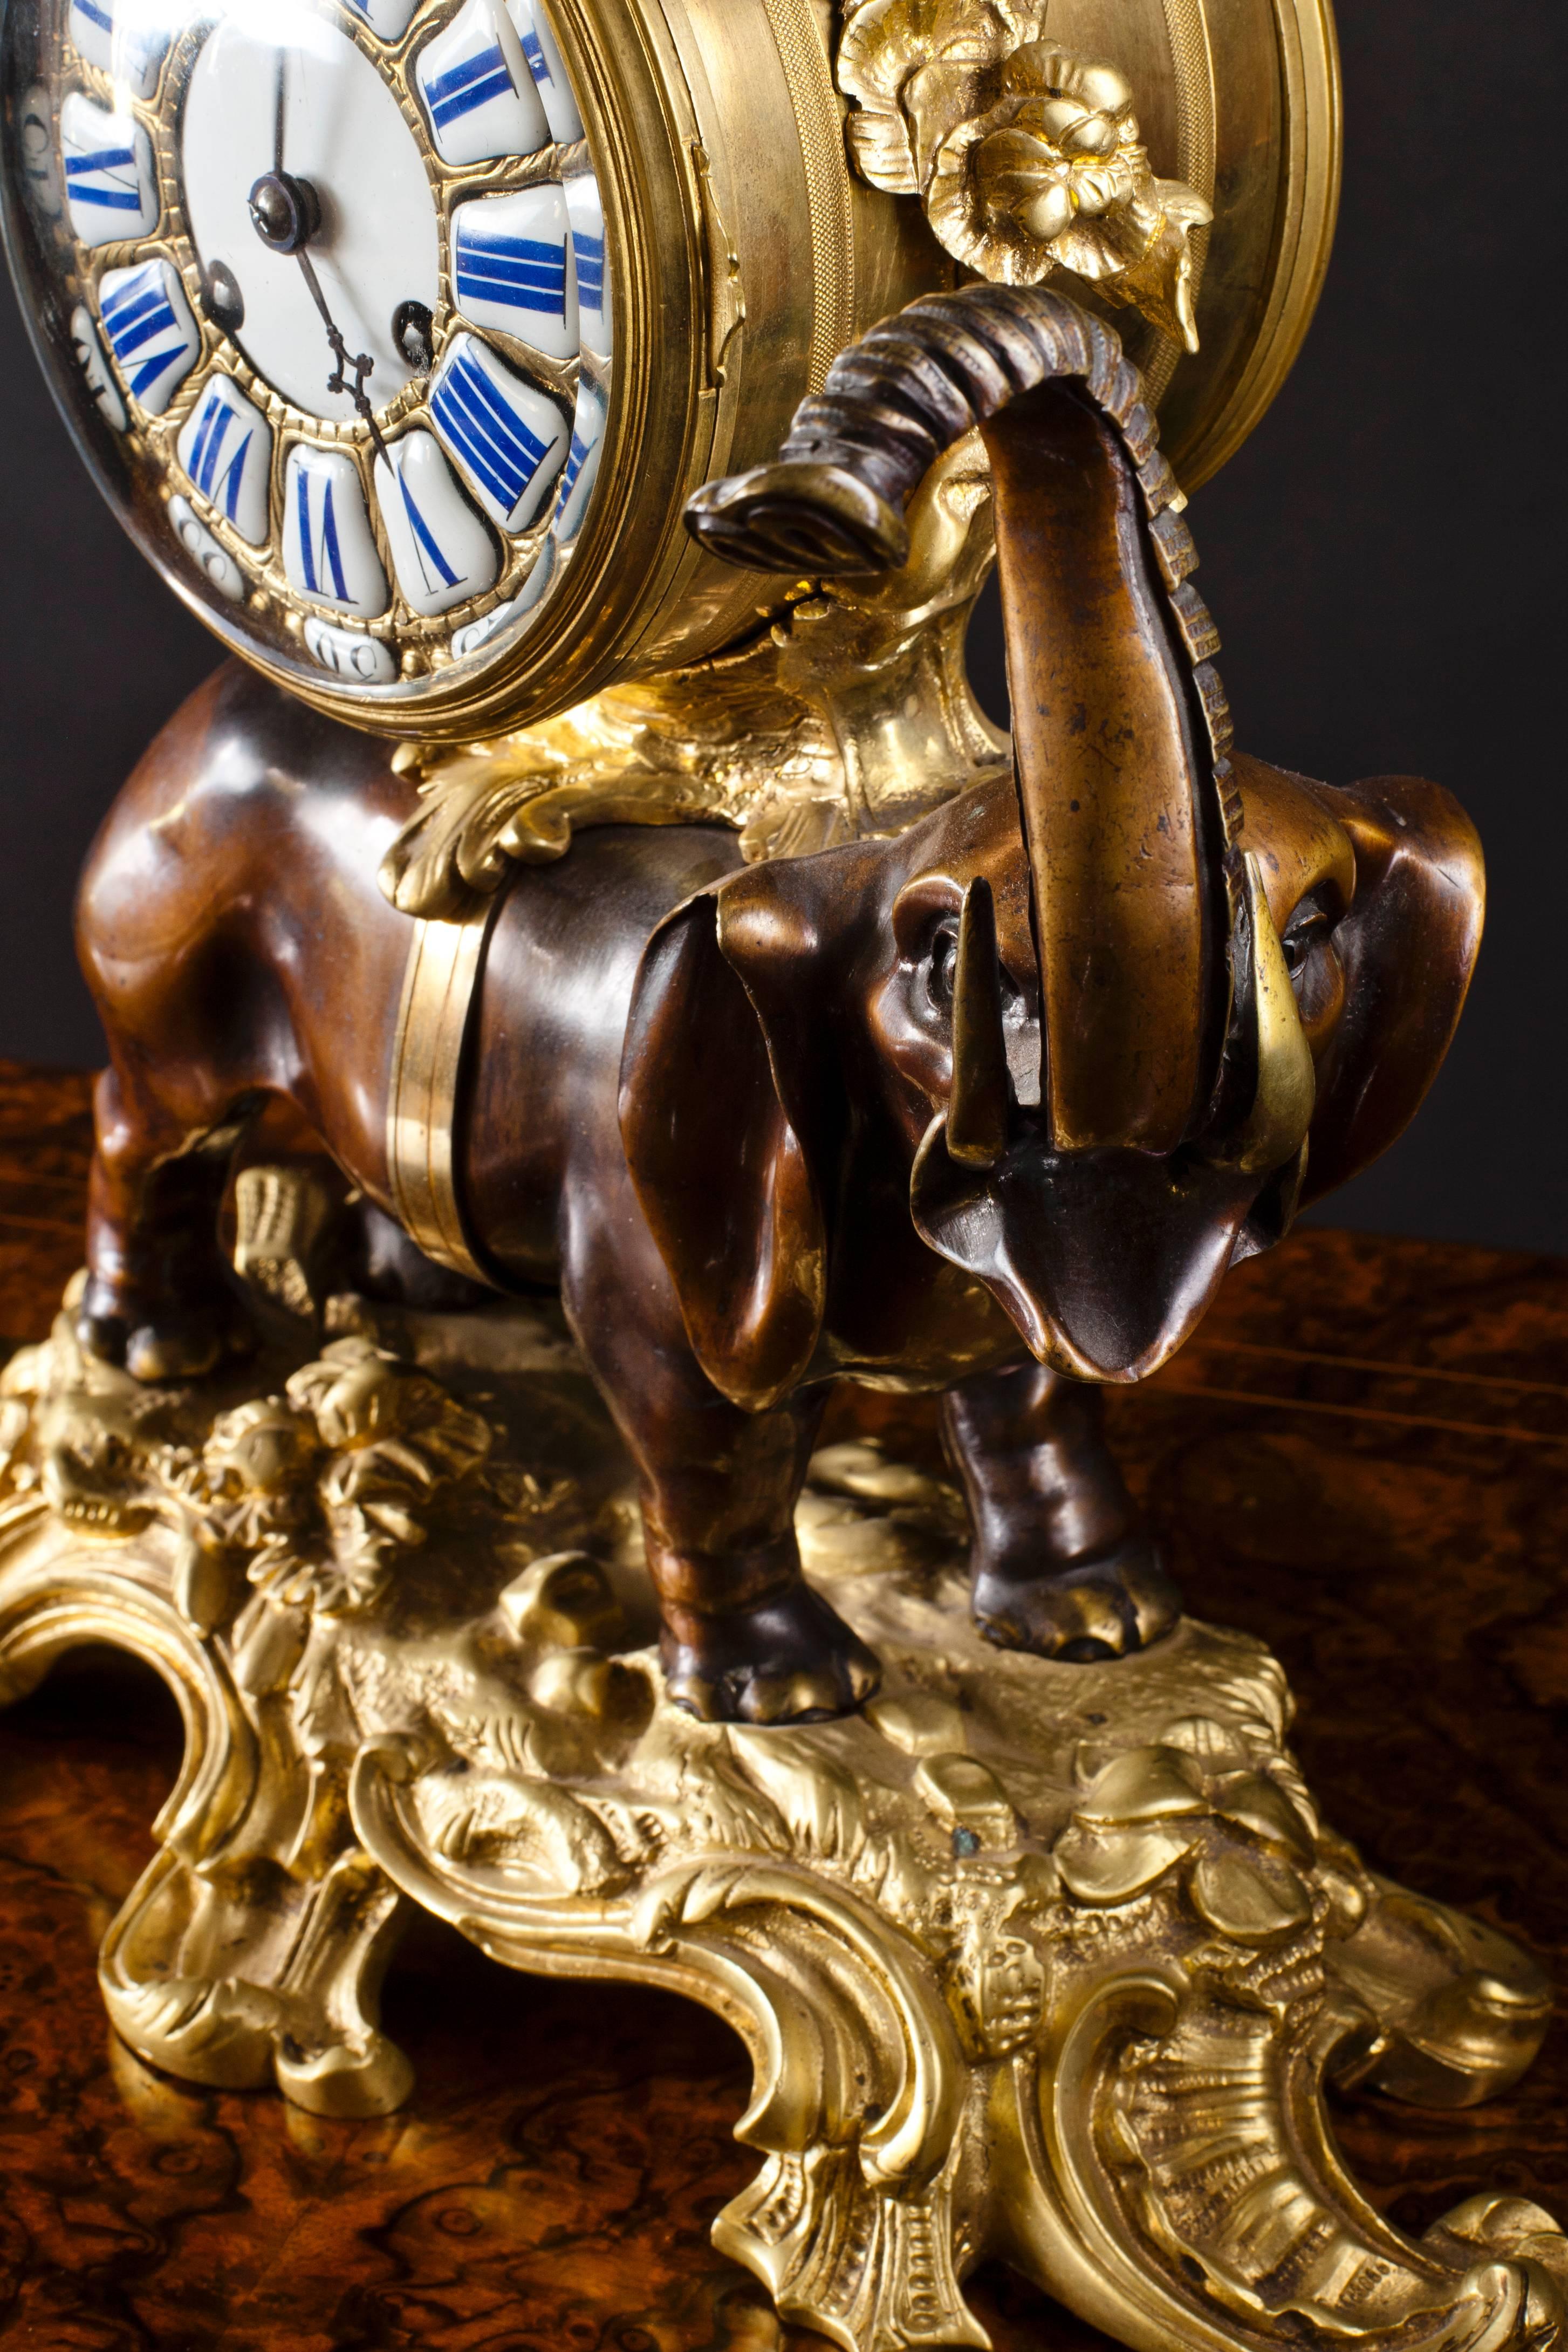 French bronze elephant clock.
A beautifully cast bronze elephant clock with raised trunk (a sign of good luck) standing on an ormolu Rococo base supporting the cylindrical clock movement. Gilded bronze dial with individual enamel cartouches for the